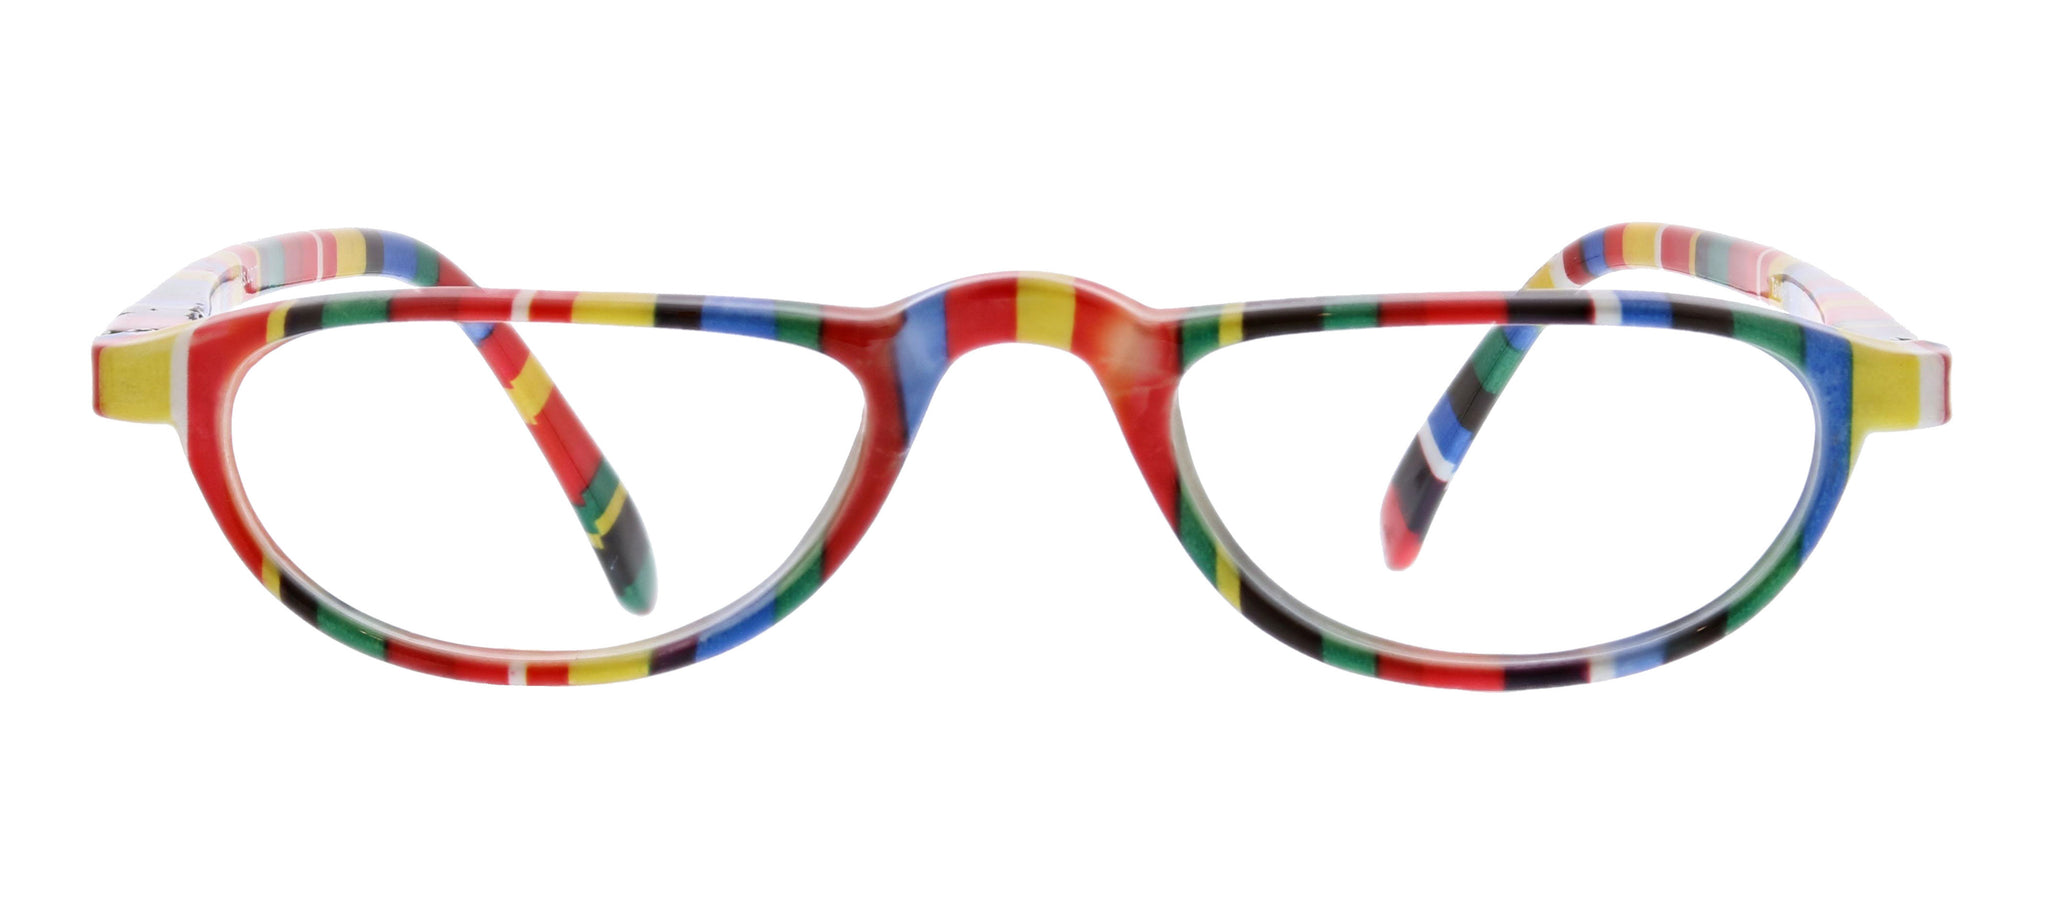 Fruit Stripe Gum multi-colored reading glasses by Peepers